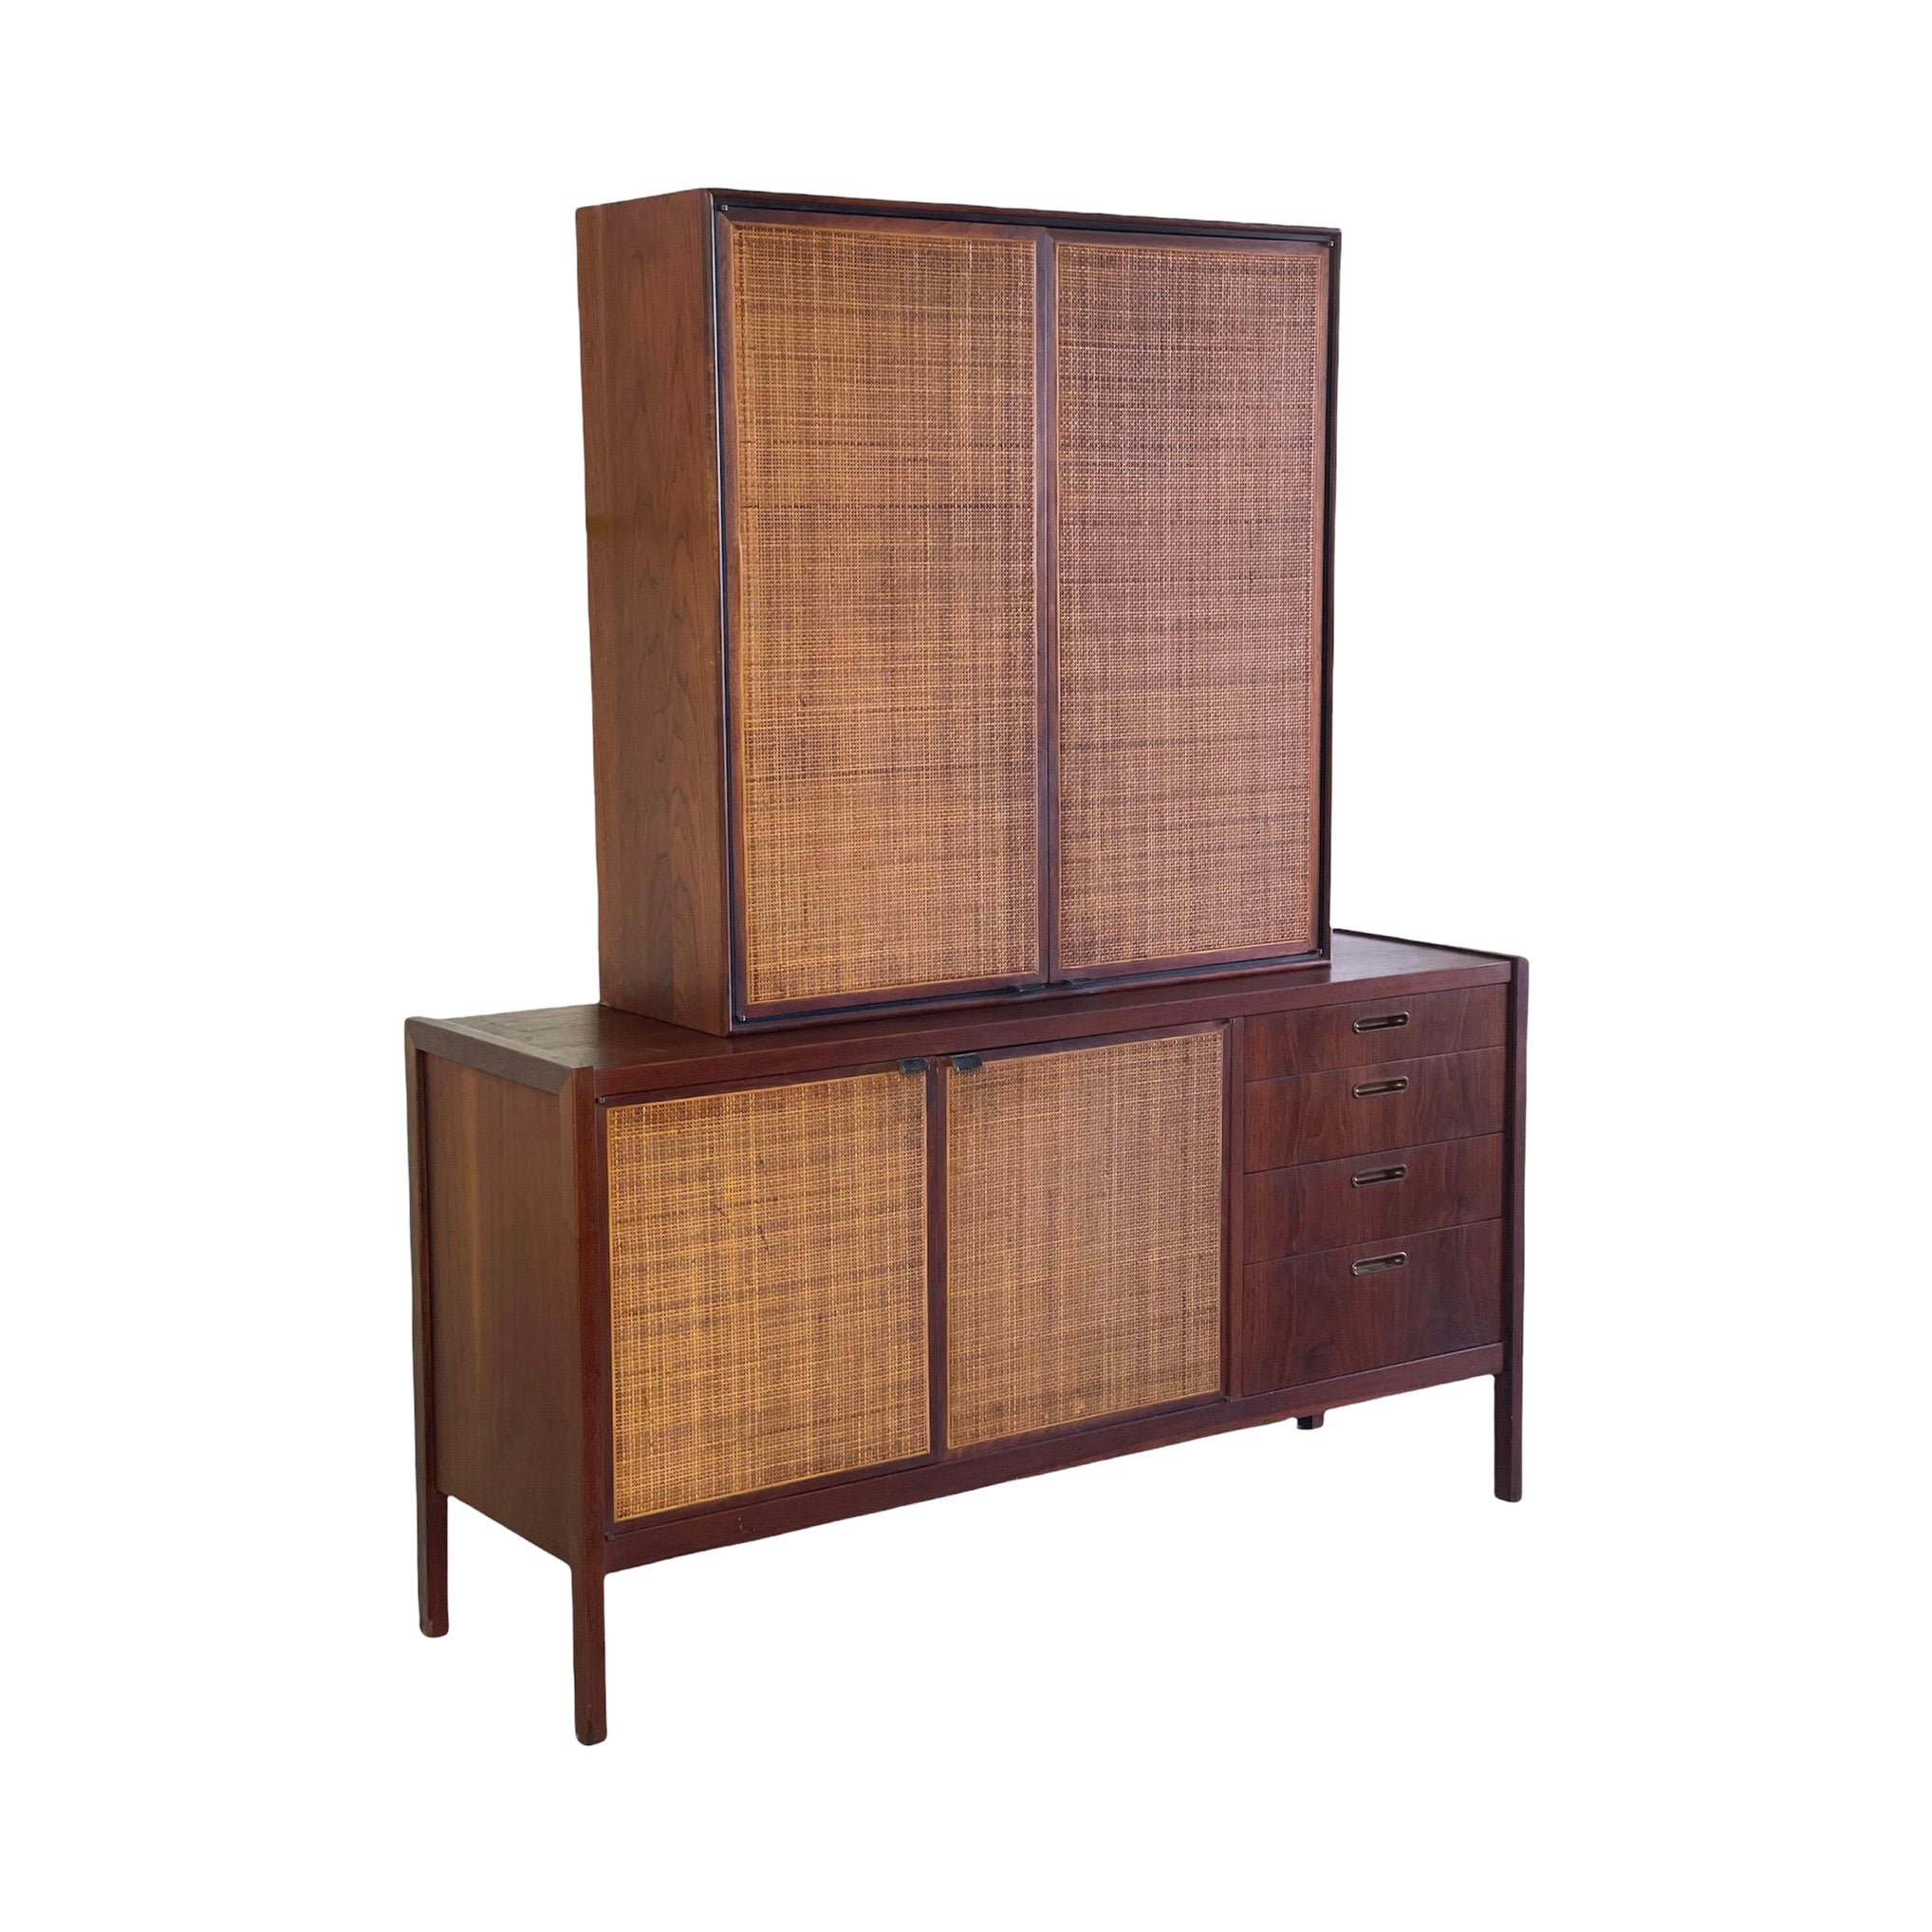 Vintage Mid Century Modern Record Cabinet Storage or Credenza For Sale